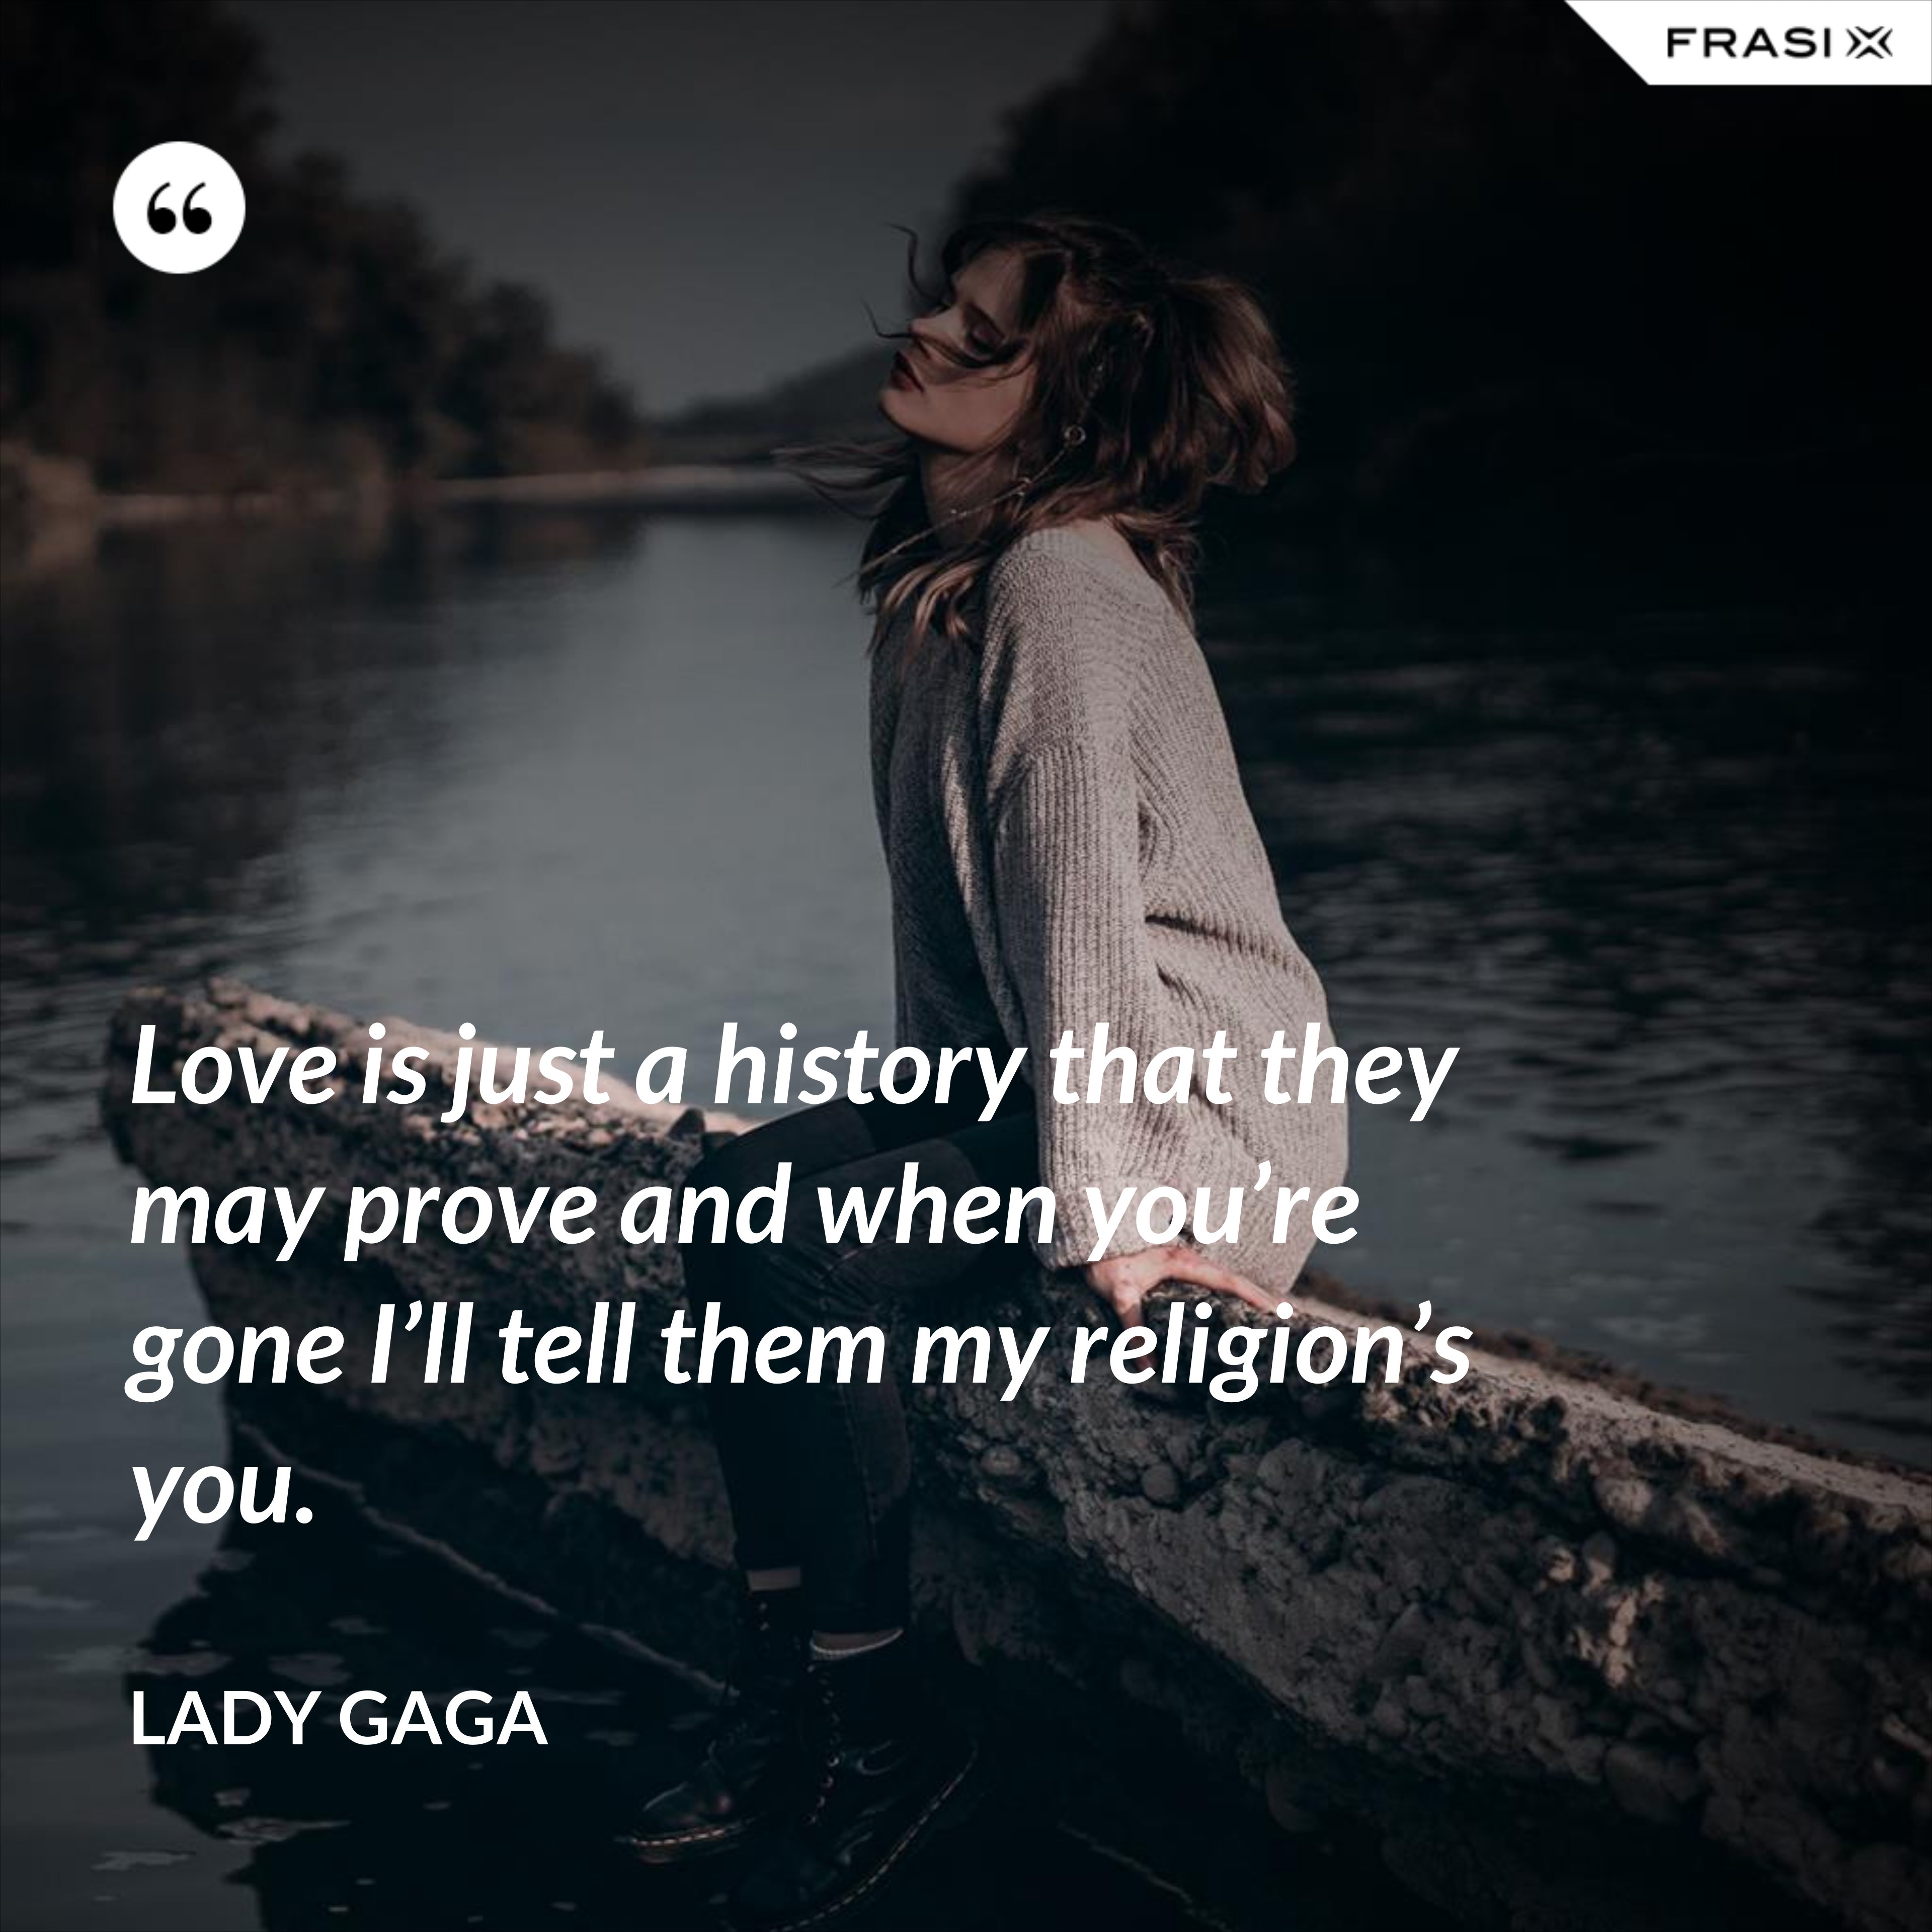 Love is just a history that they may prove and when you’re gone I’ll tell them my religion’s you. - Lady Gaga